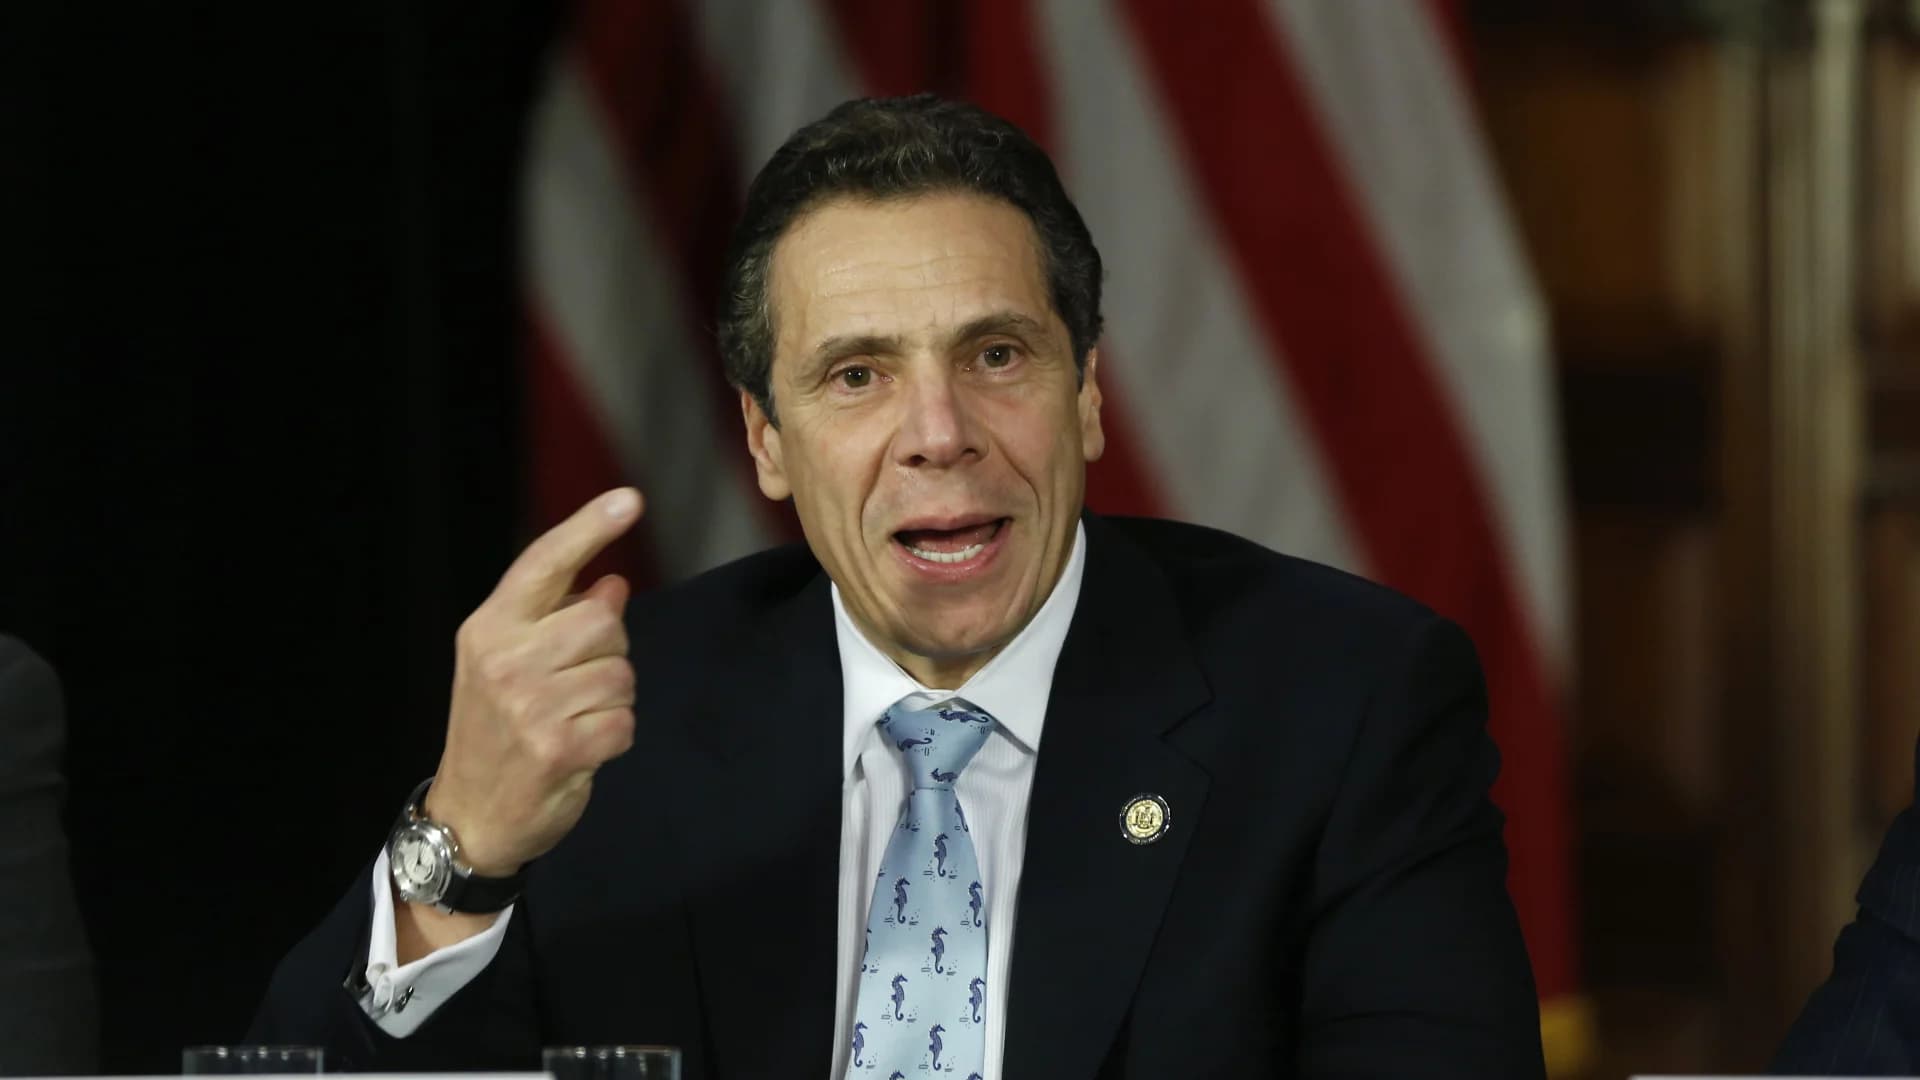 Gov. Cuomo: 7-day COVID-19 positivity rate in NY drops below 1% for 1st time since Sept. 26